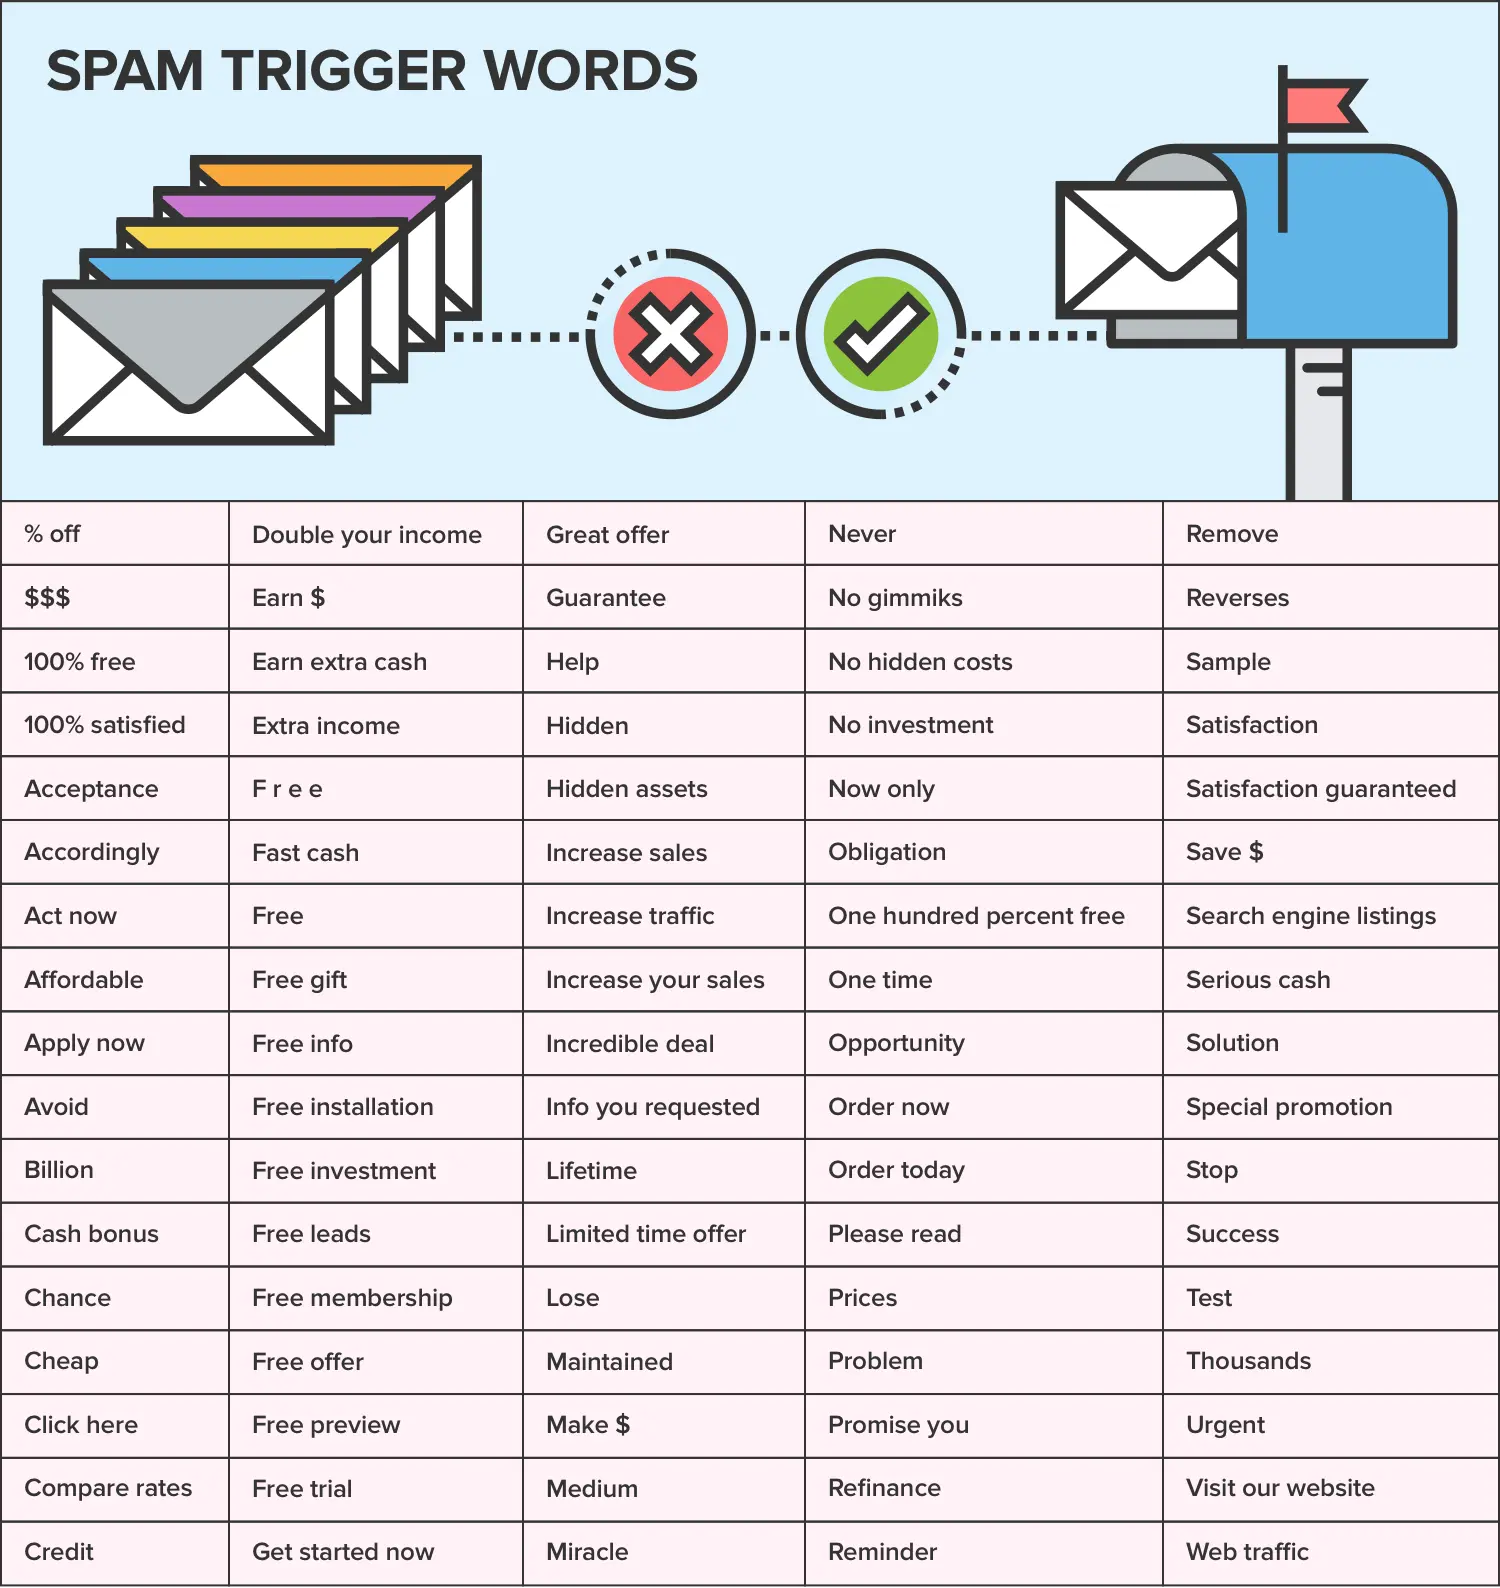 spam trgger words email